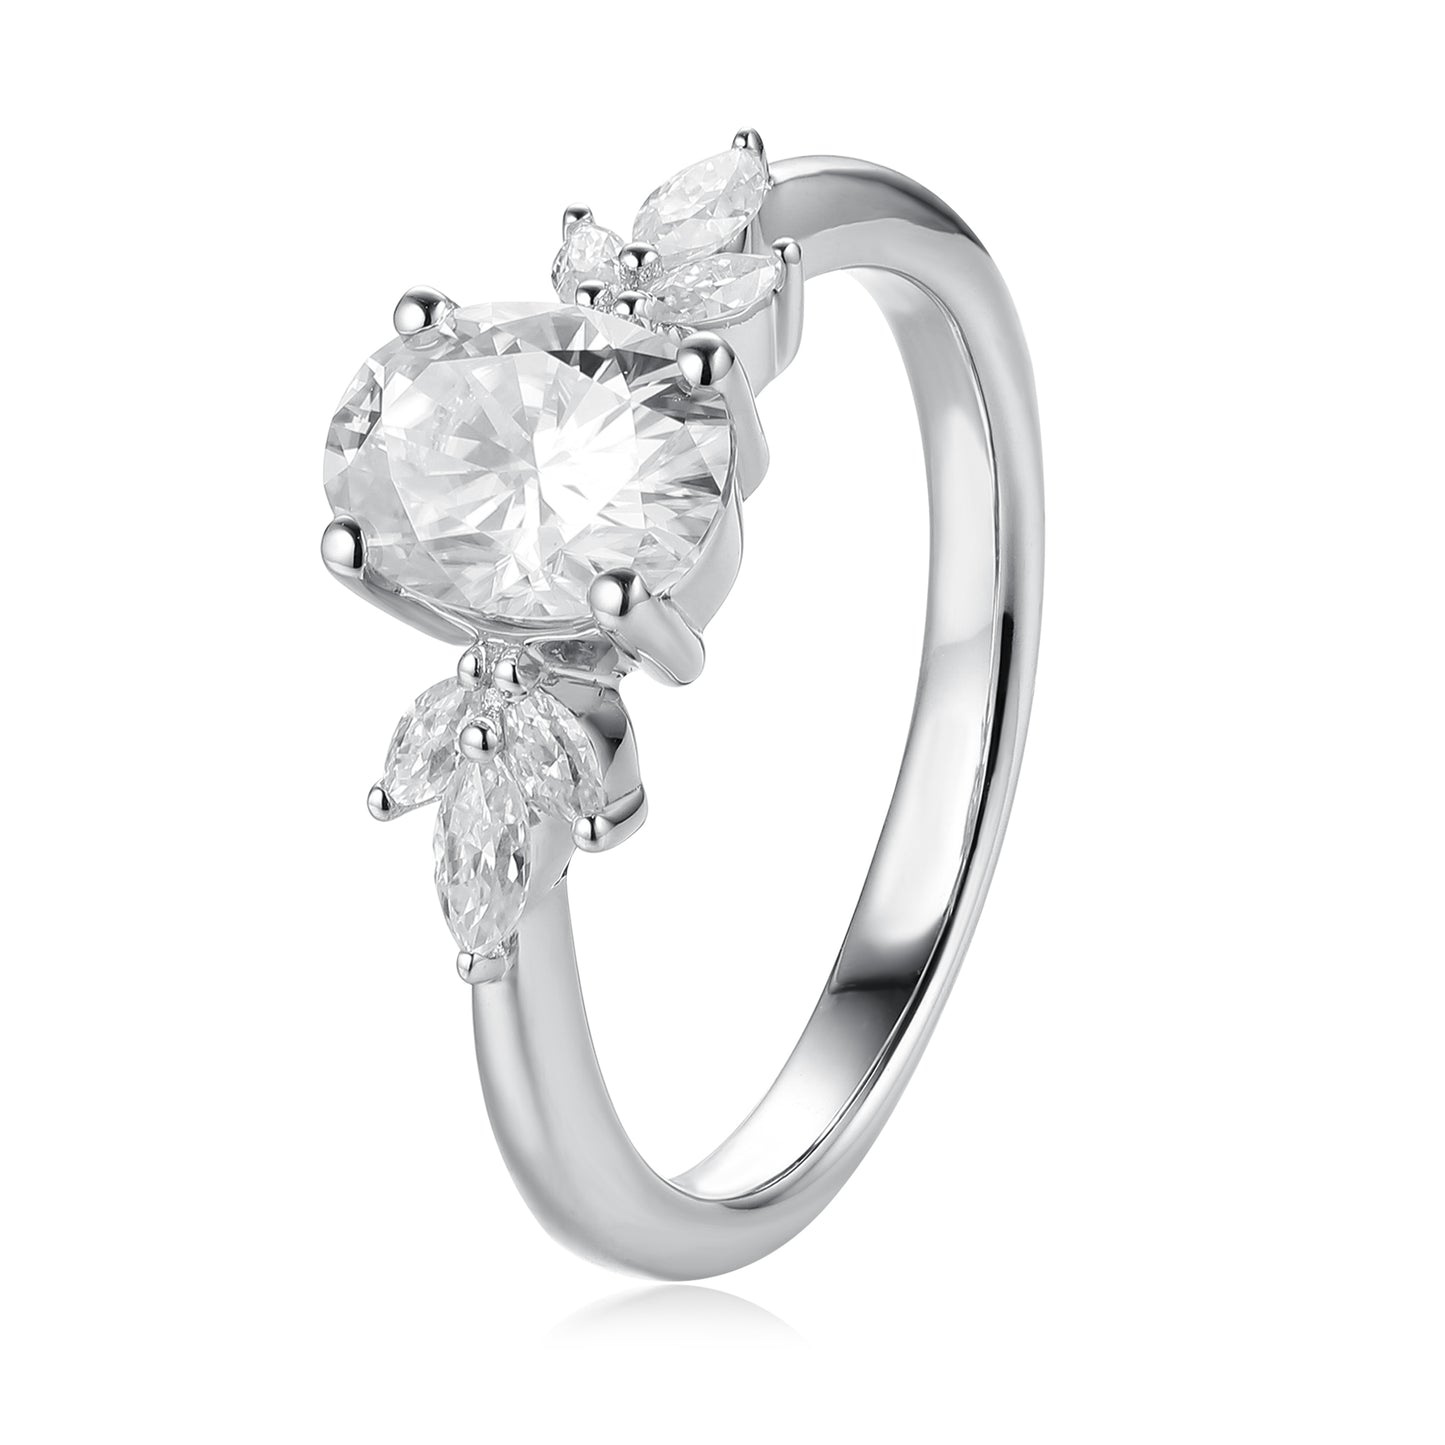 Marquise Cluster Moissanite Ring, Unique Oval Cut 1.5CT Moissanite Wedding Anniversary Ring For Women